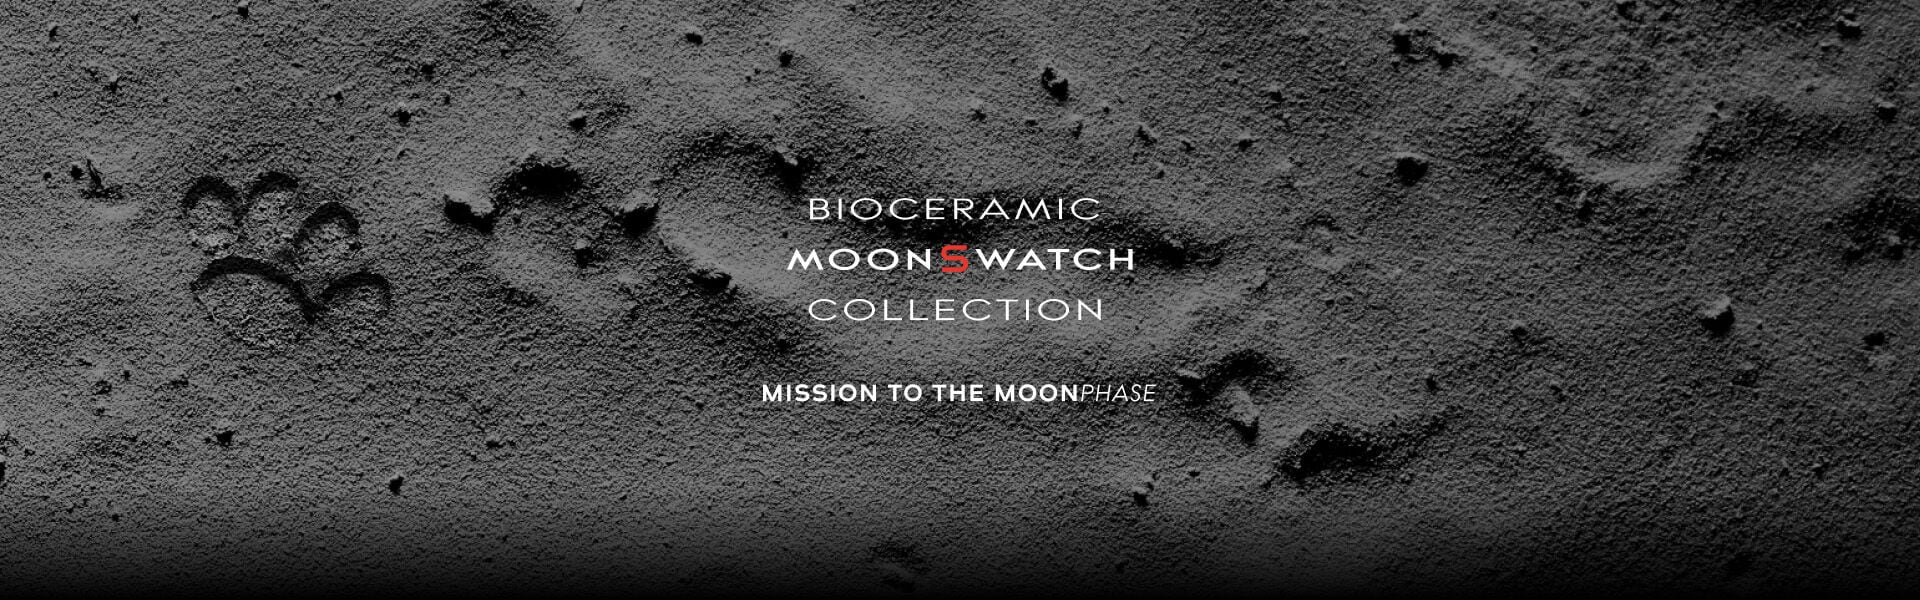 The Bioceramic MoonSwatch Collection launches new missions!